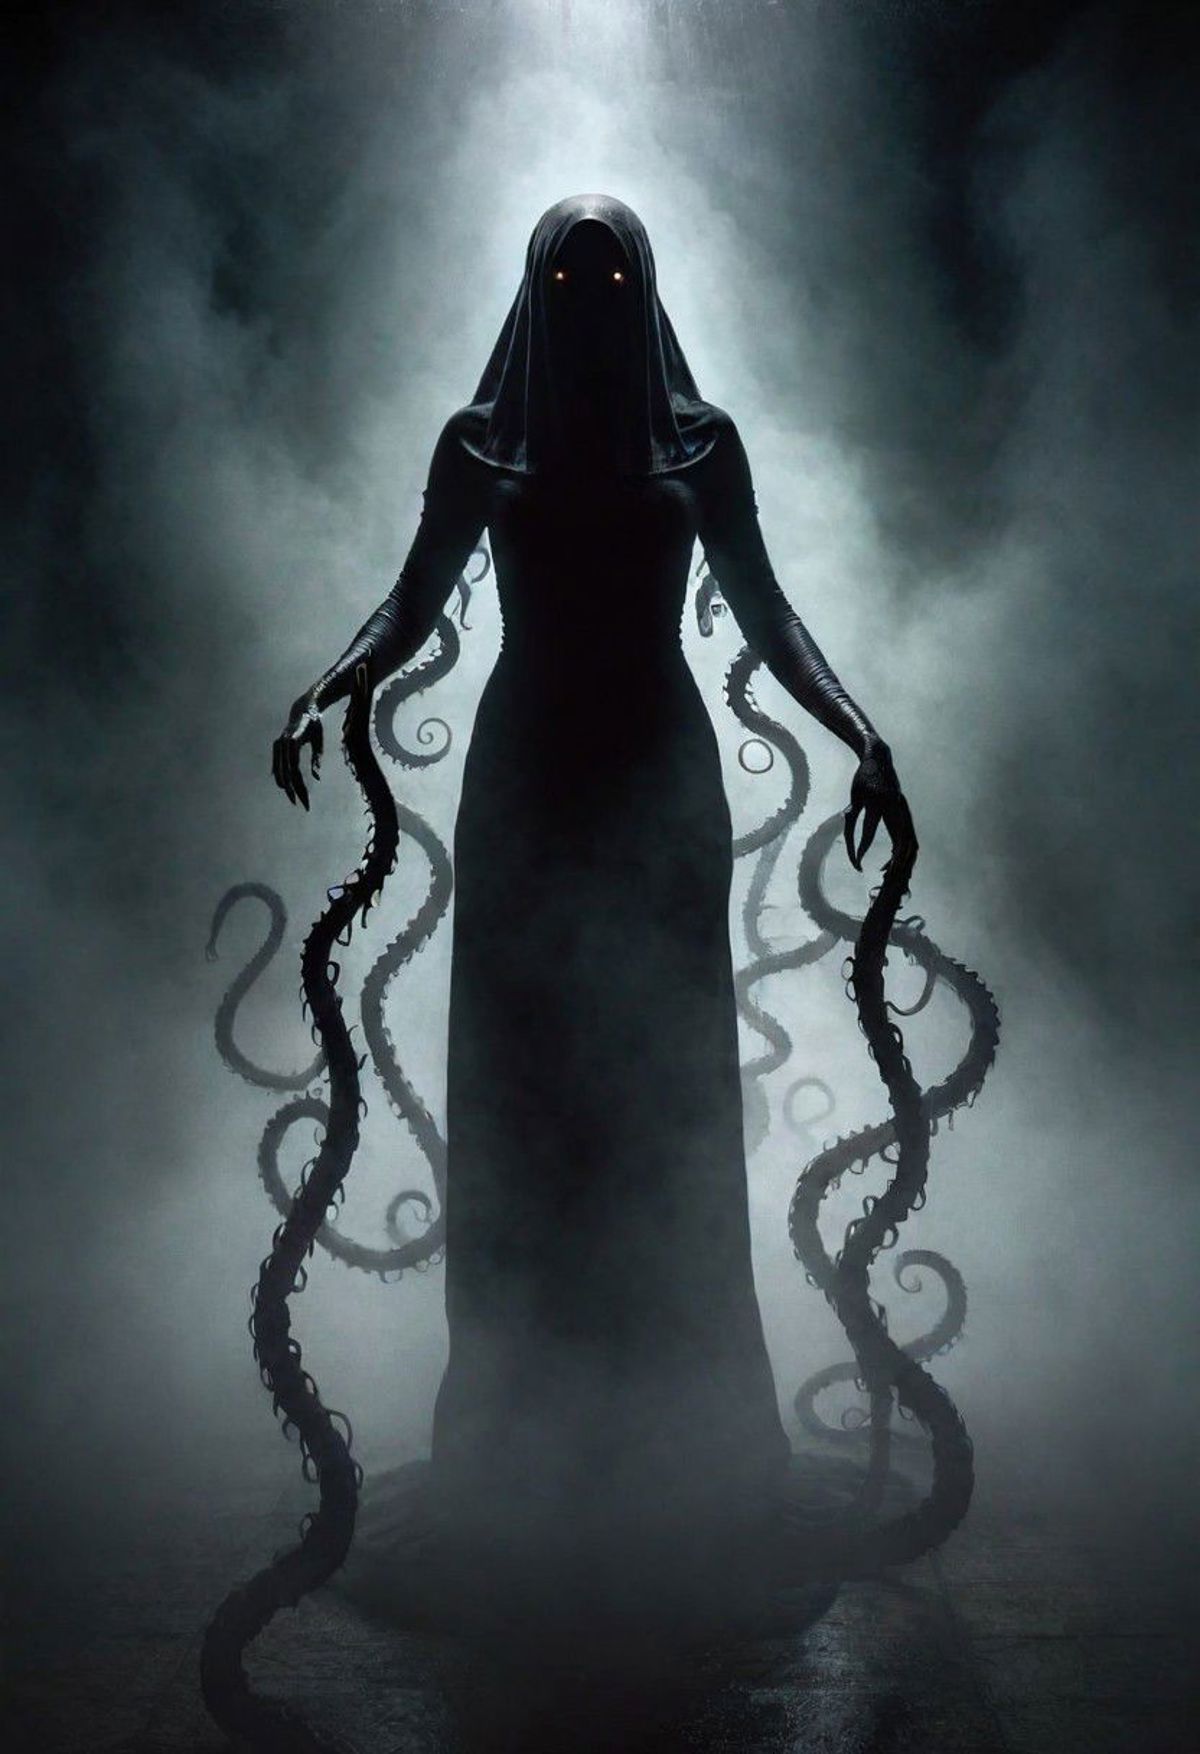 Lady in a black dress with long, curly octopus arms in a mysterious, dark setting.